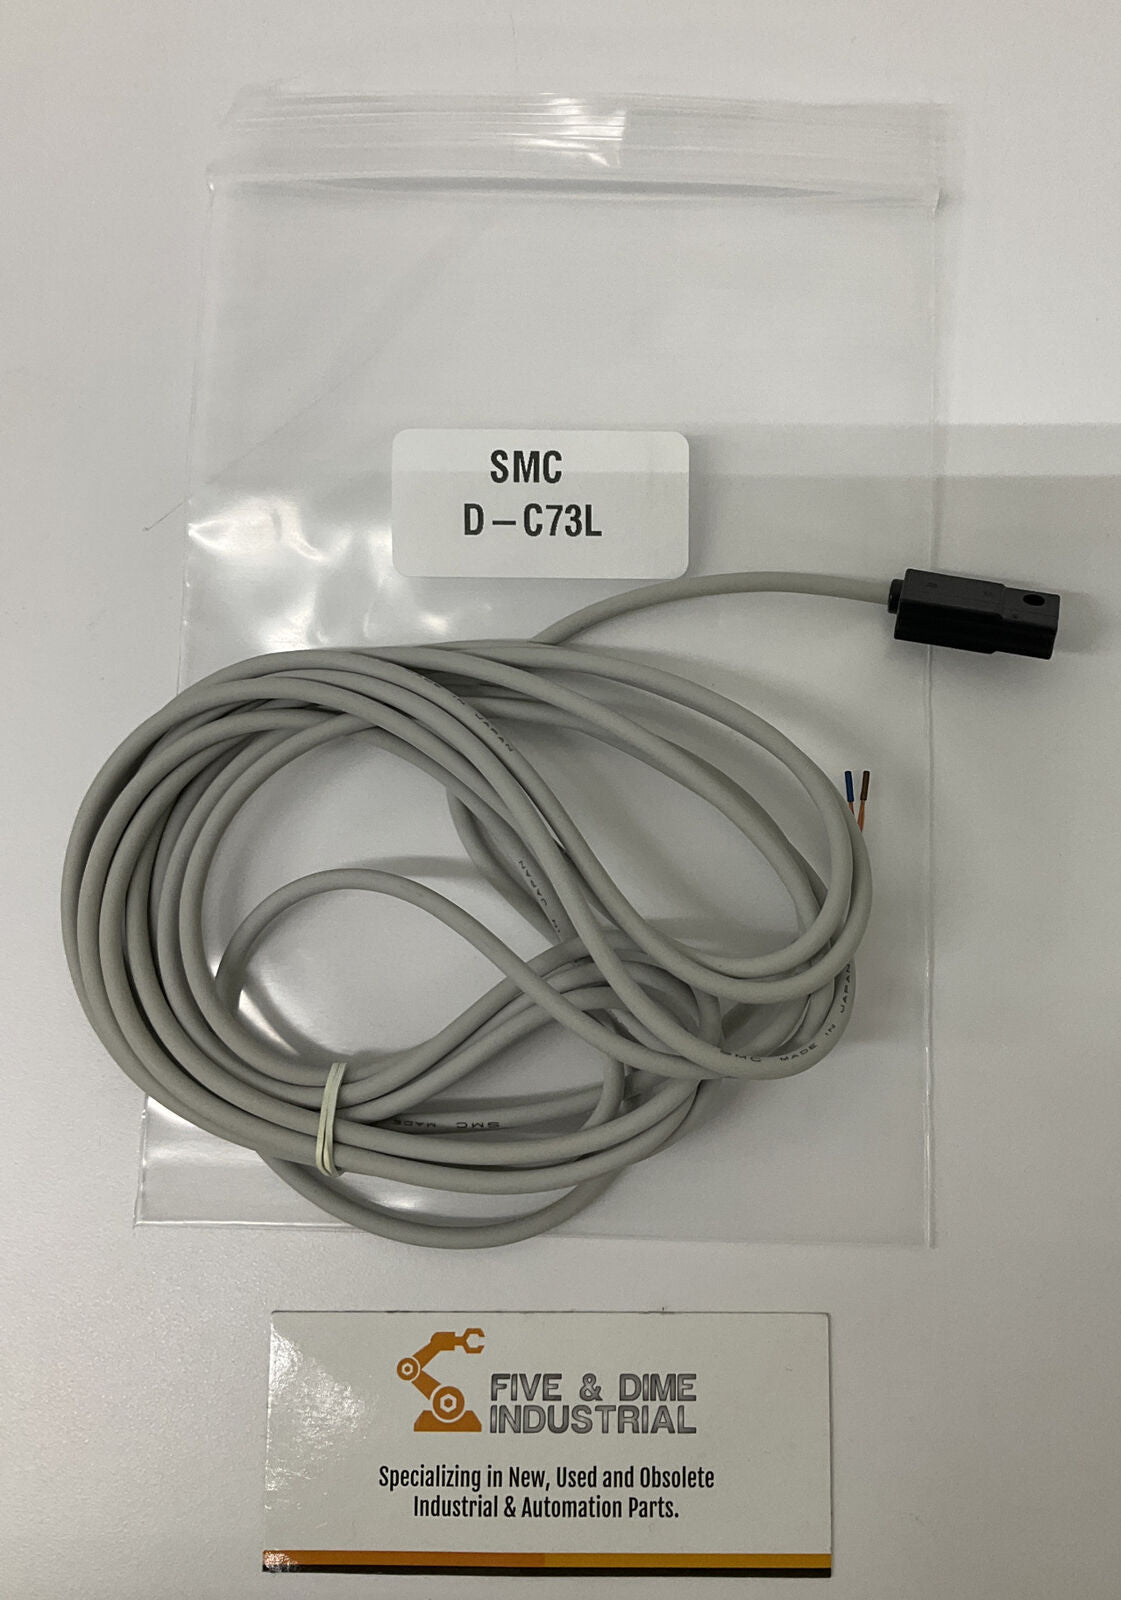 SMC D-C73L NPN Reed Switch  3 Meters  2-wire  24VDC  110VAC (RE195)